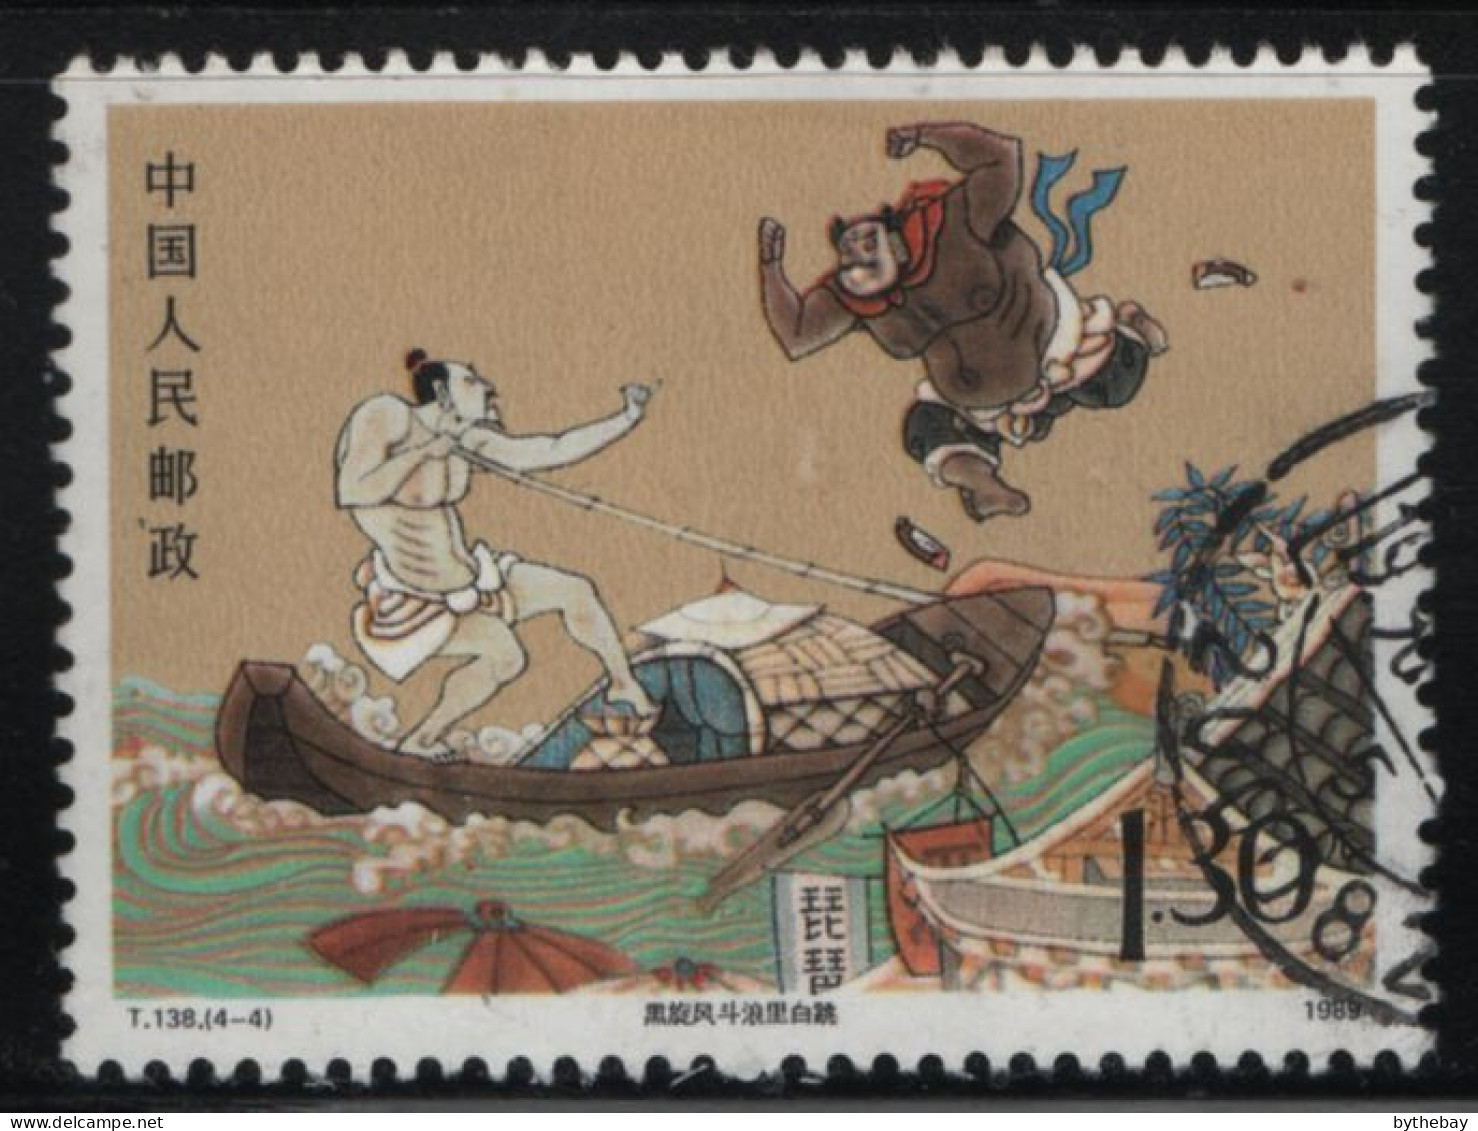 China People's Republic 1989 Used Sc 2219 $1.30 Li Kui Fighting Zhang Shun From Boat - Used Stamps